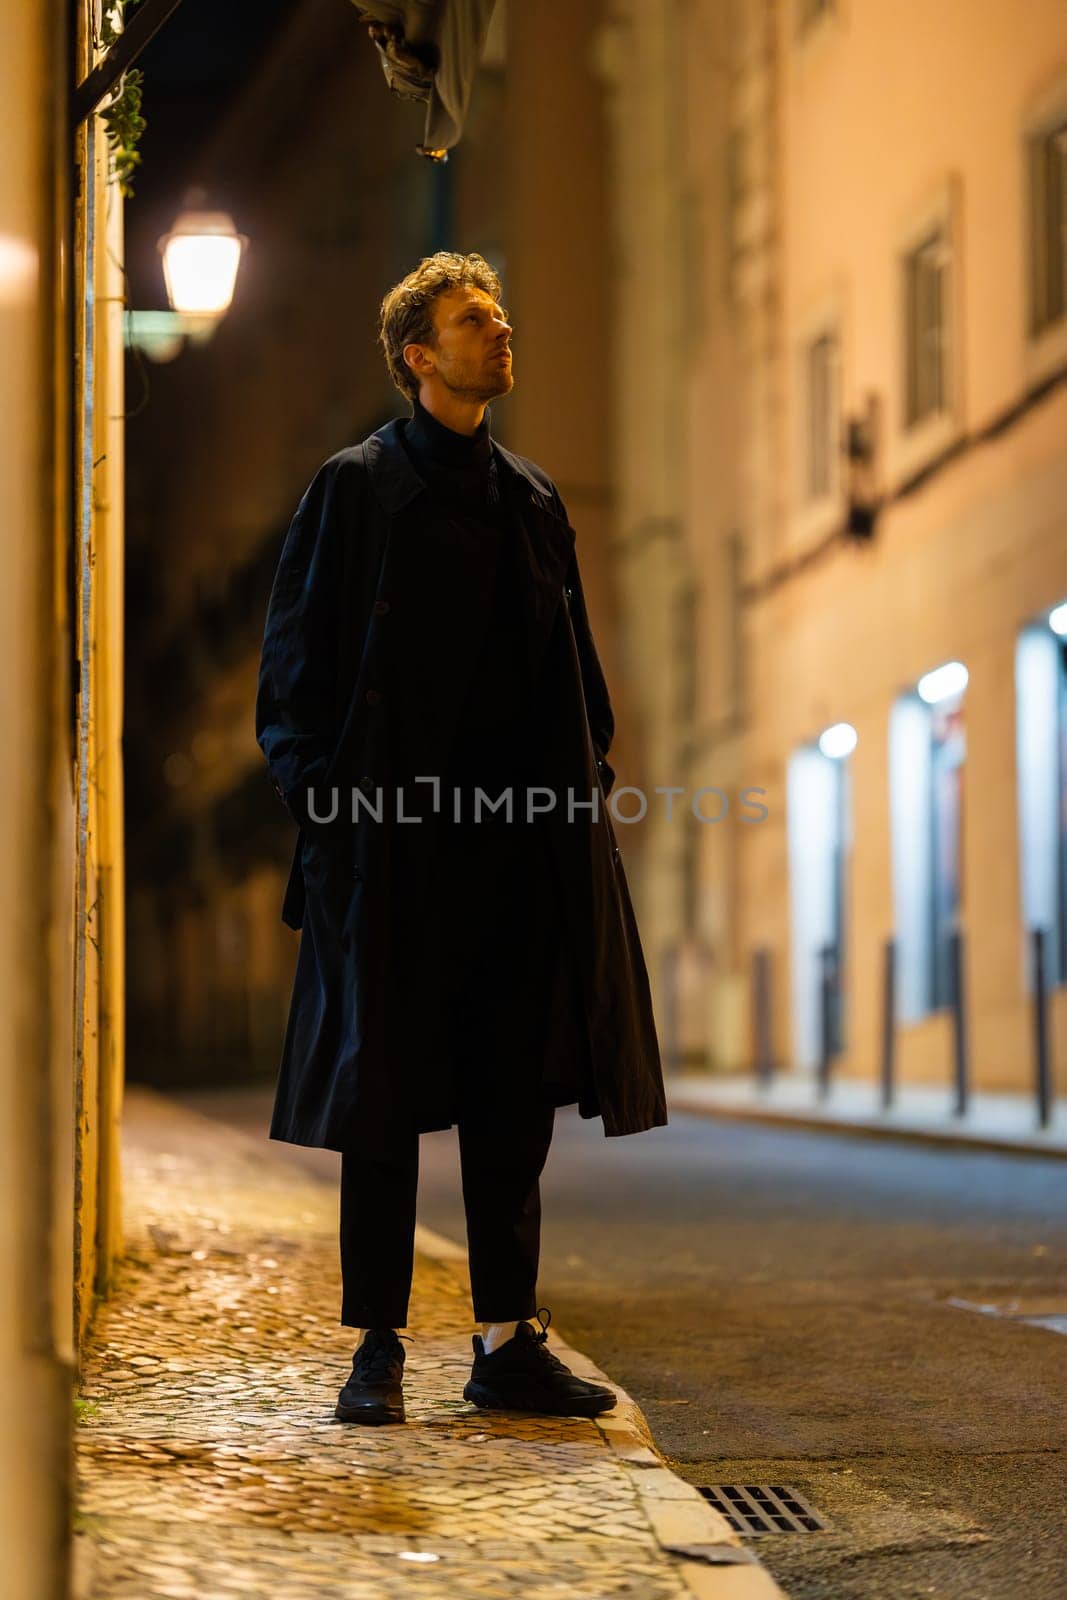 A man in black suit in a city street at night - vertical